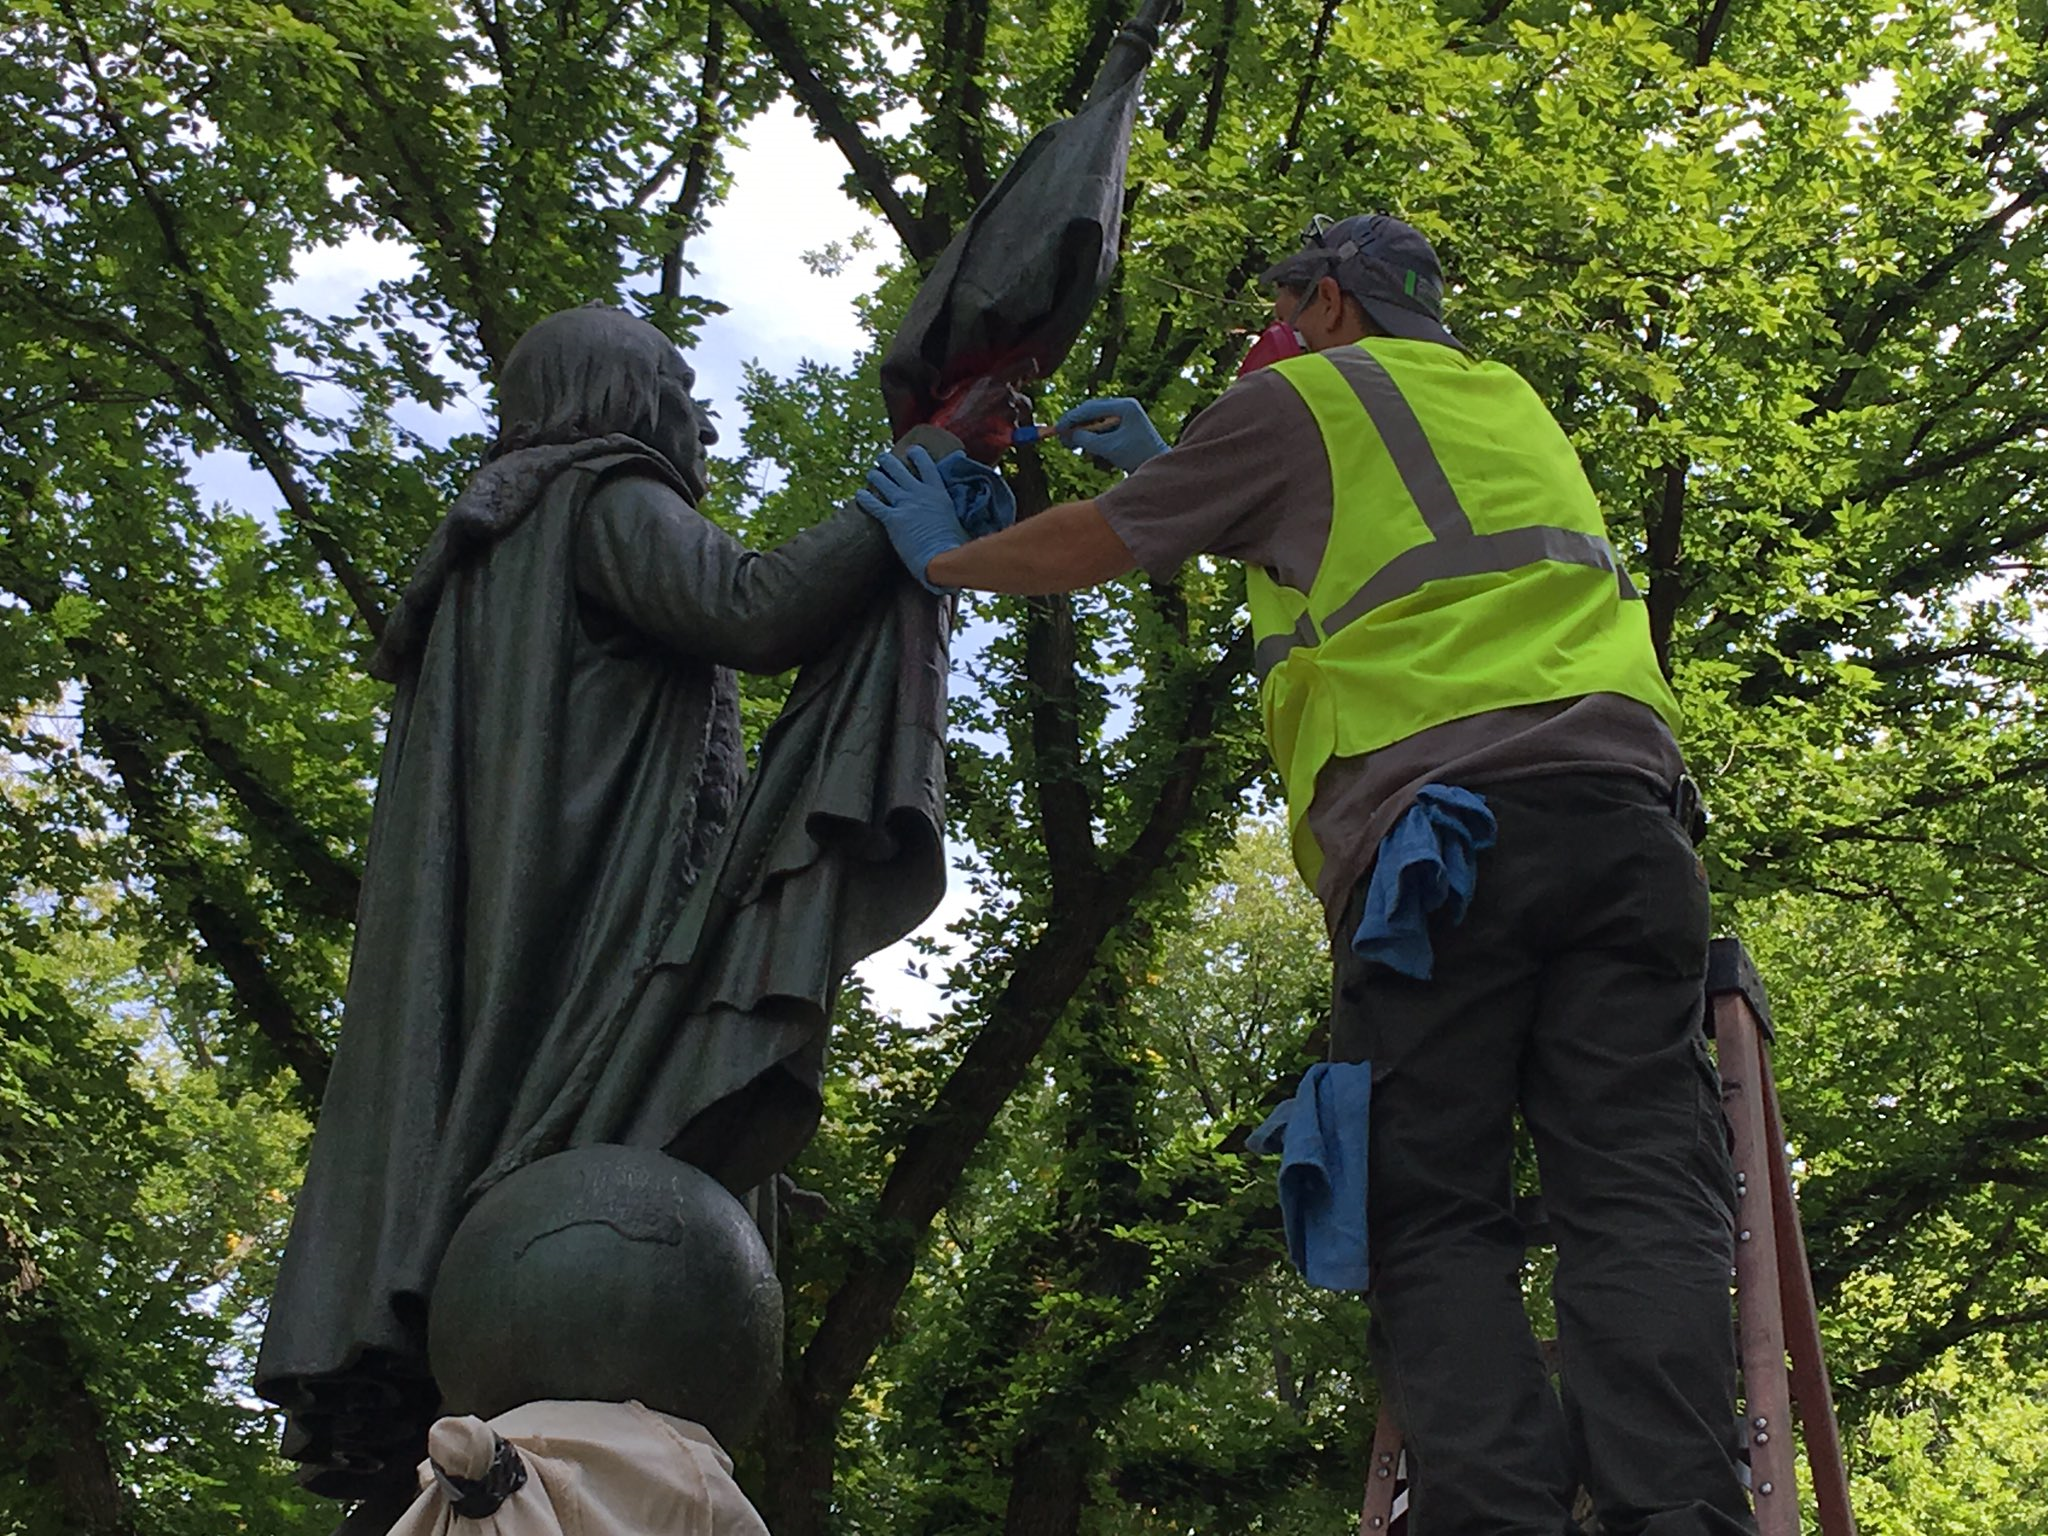 Statue Of Christopher Columbus Vandalized In Central Park